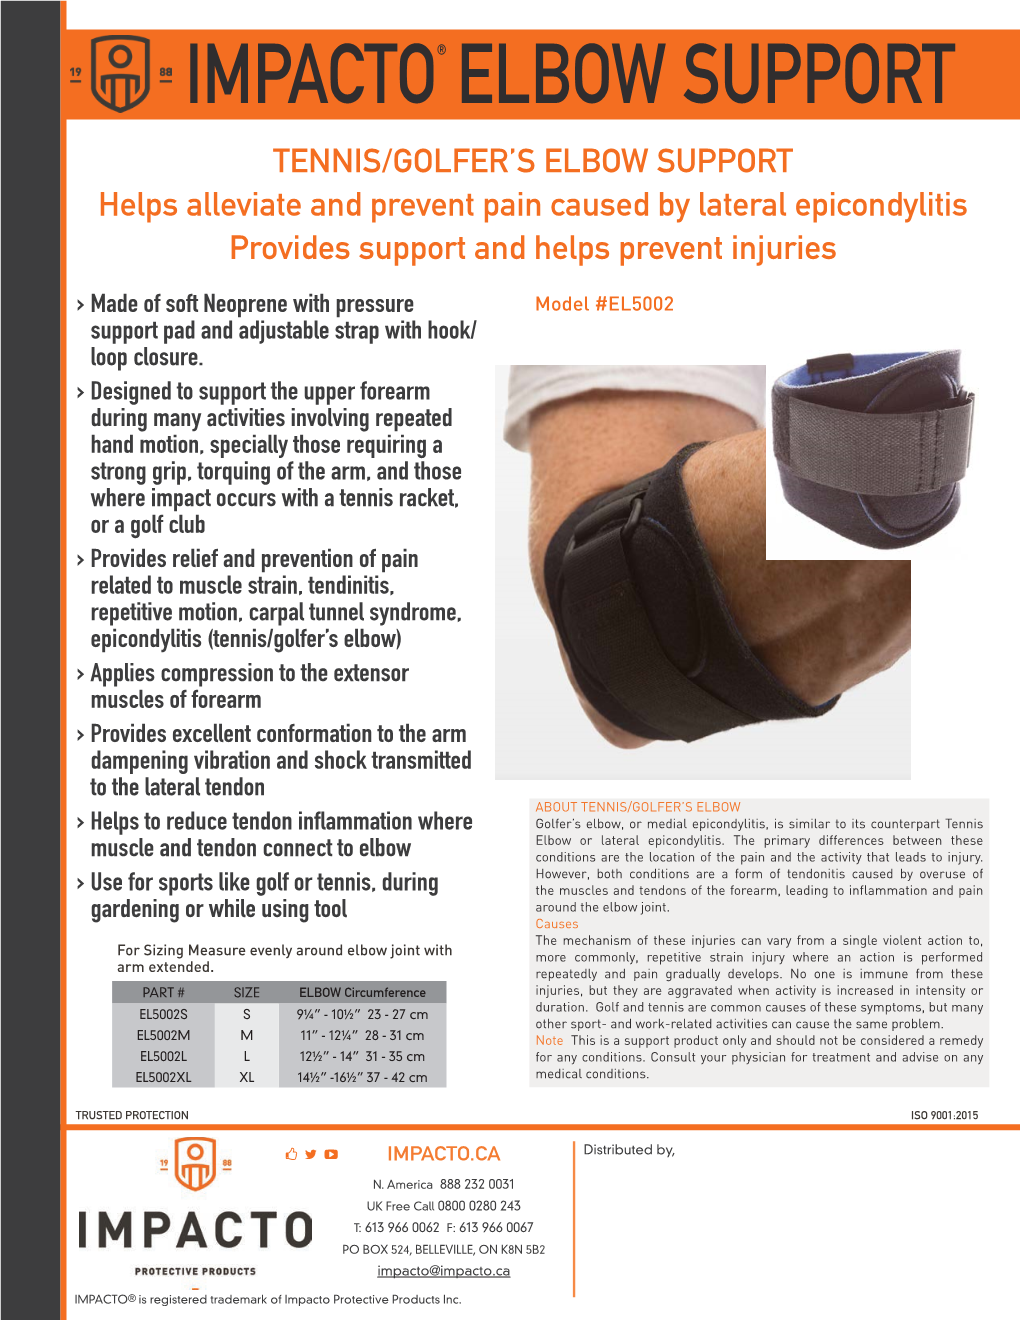 IMPACTO® ELBOW SUPPORT TENNIS/GOLFER’S ELBOW SUPPORT Helps Alleviate and Prevent Pain Caused by Lateral Epicondylitis Provides Support and Helps Prevent Injuries